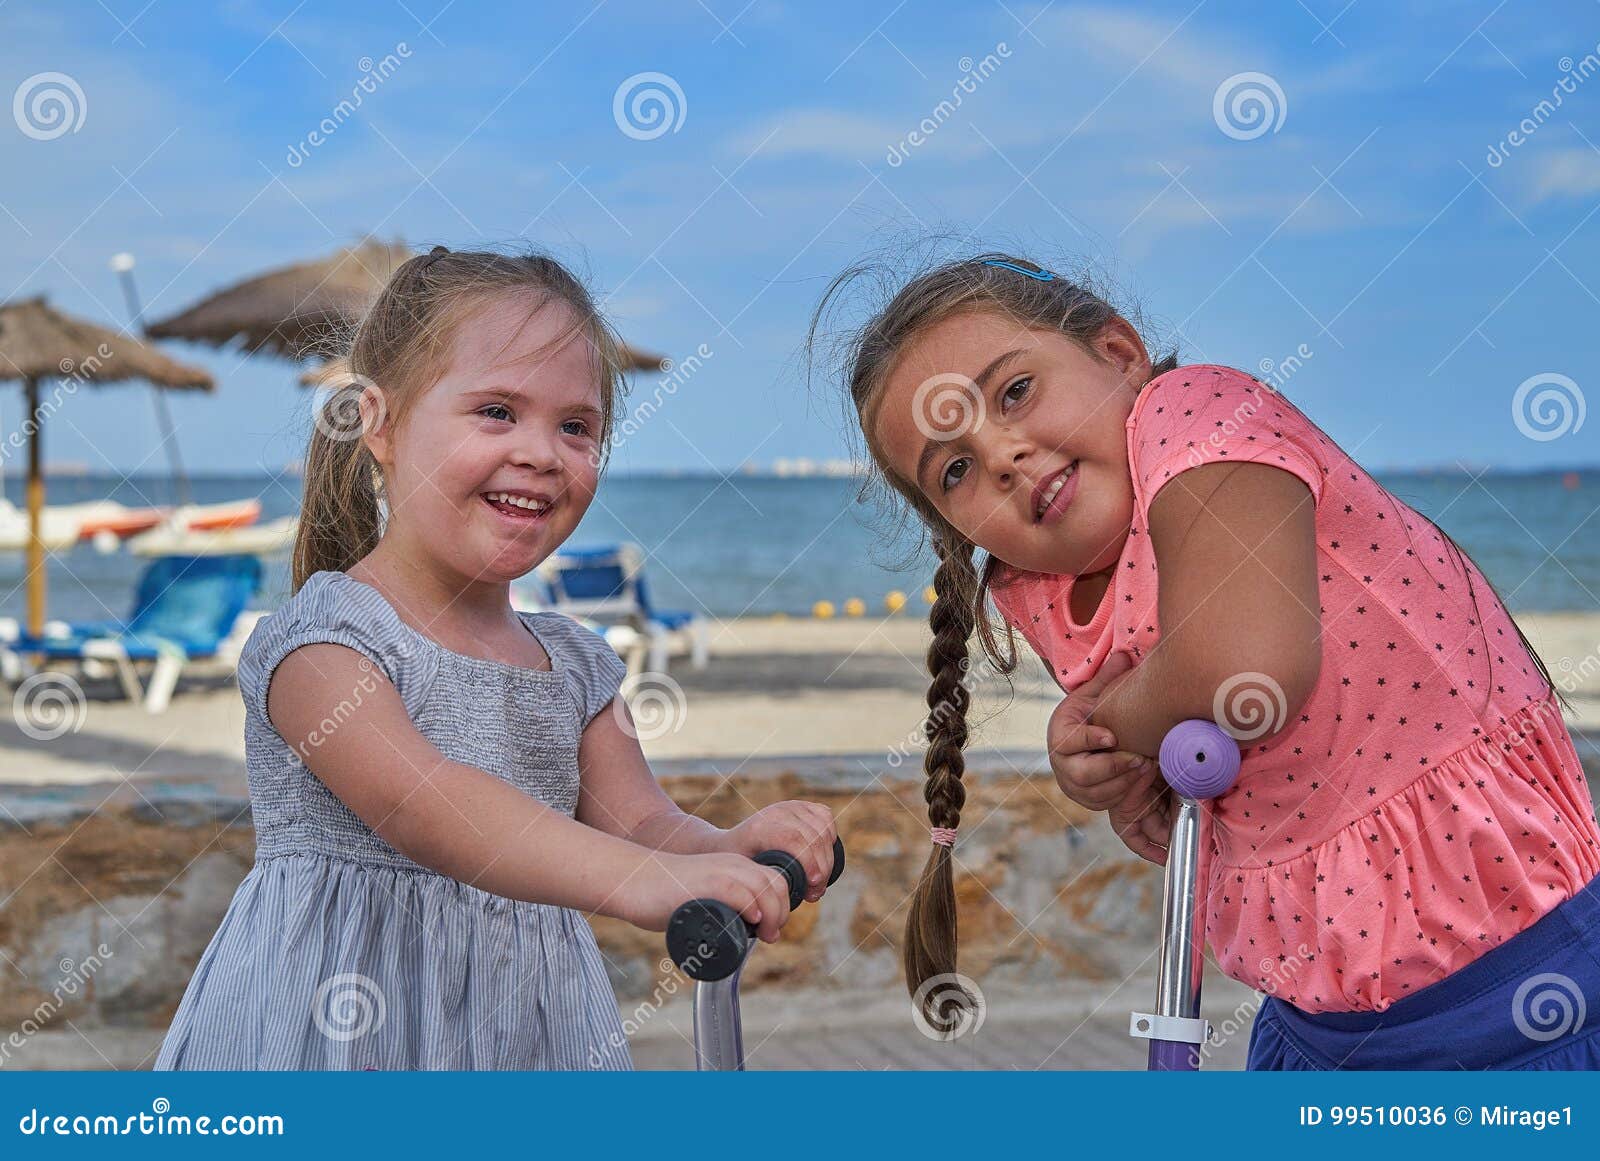 two happy young girls on scooters by the beach